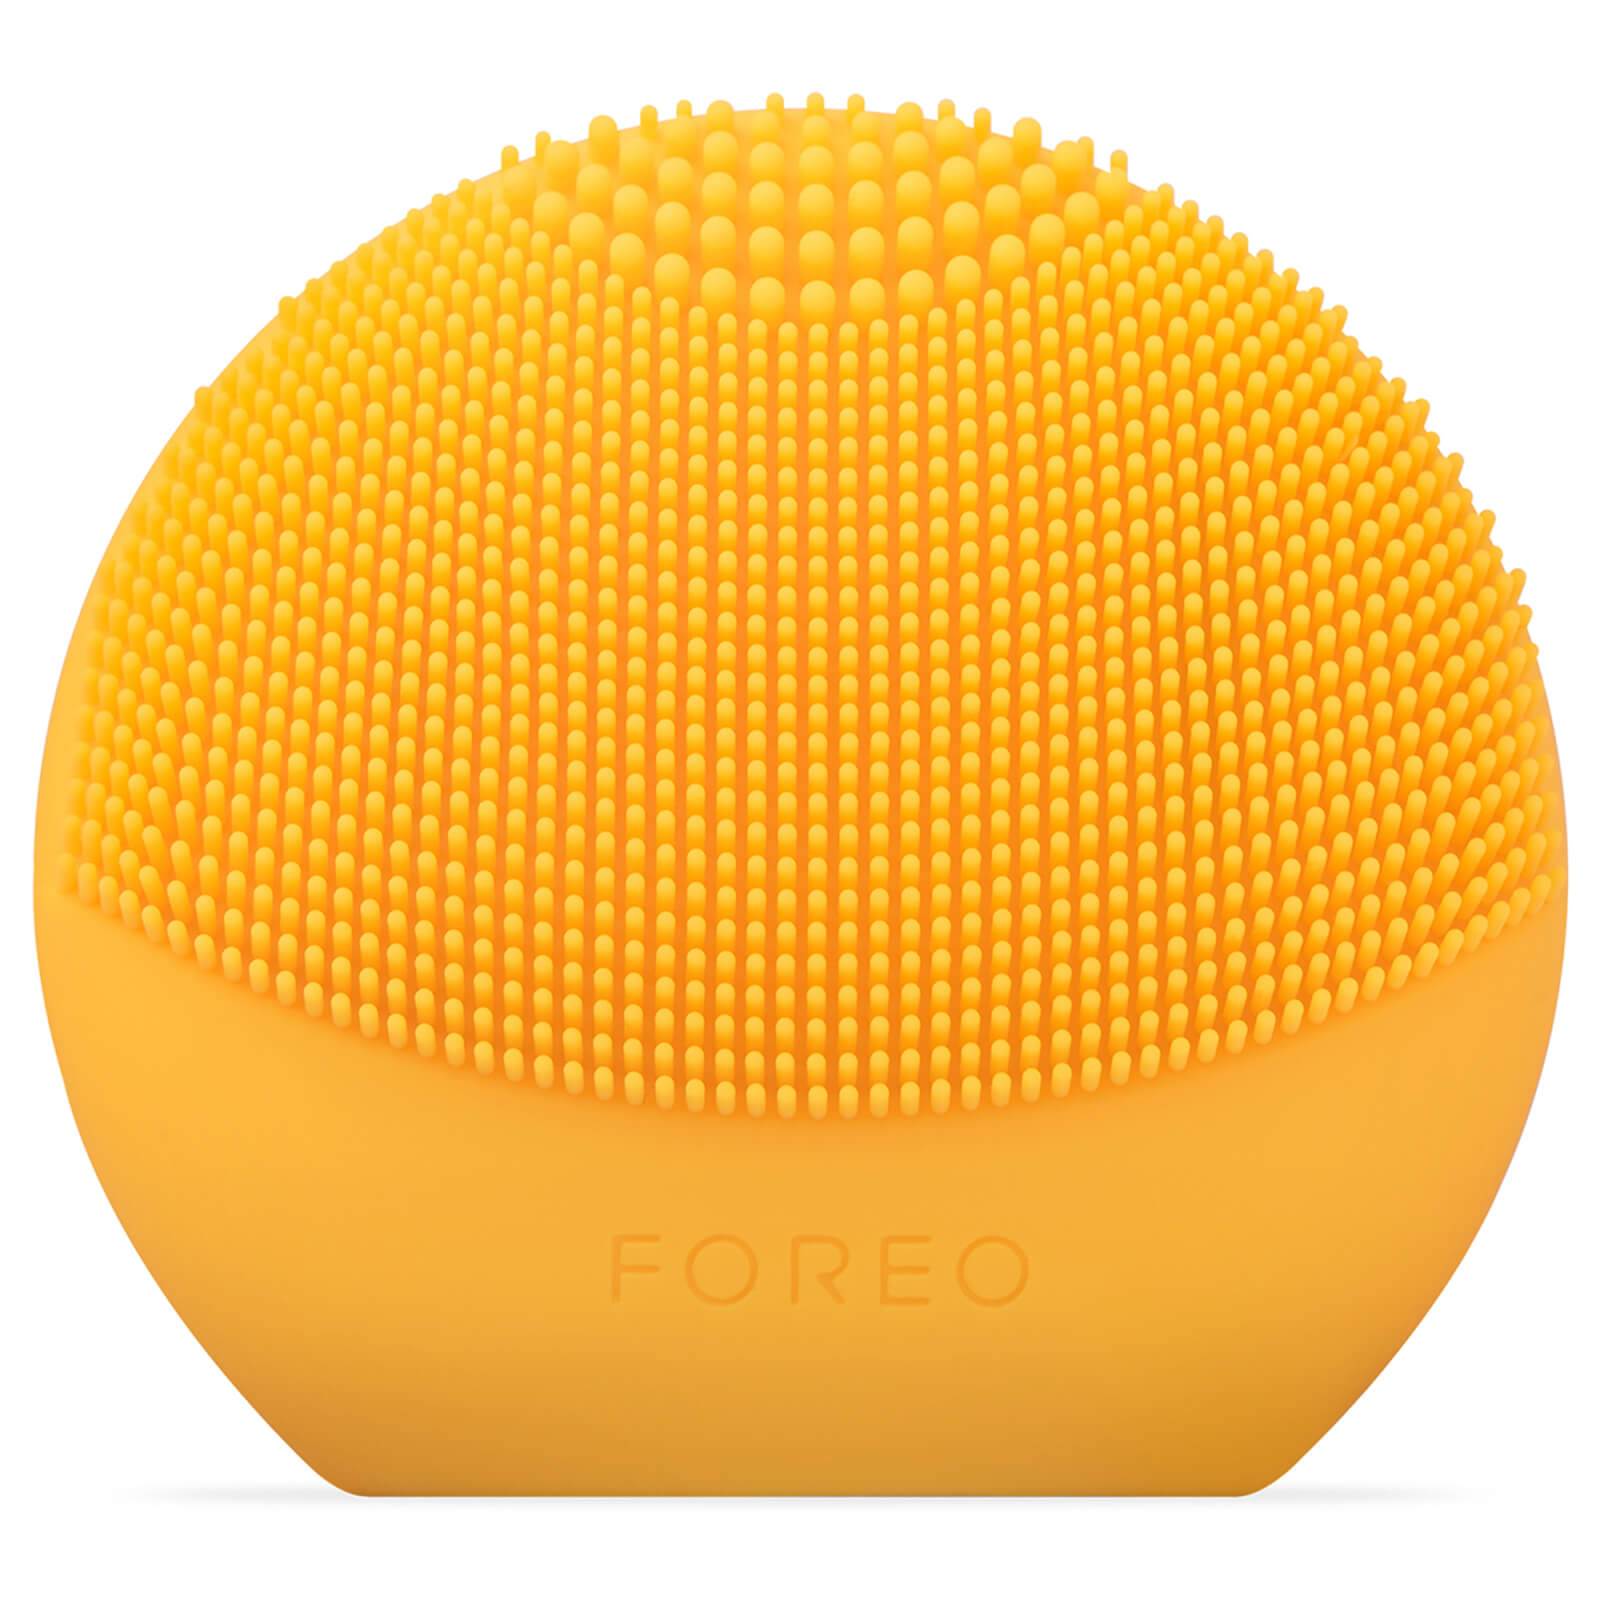 FOREO FOREO LUNA FOFO FACIAL BRUSH WITH SKIN ANALYSIS (VARIOUS SHADES),F7812